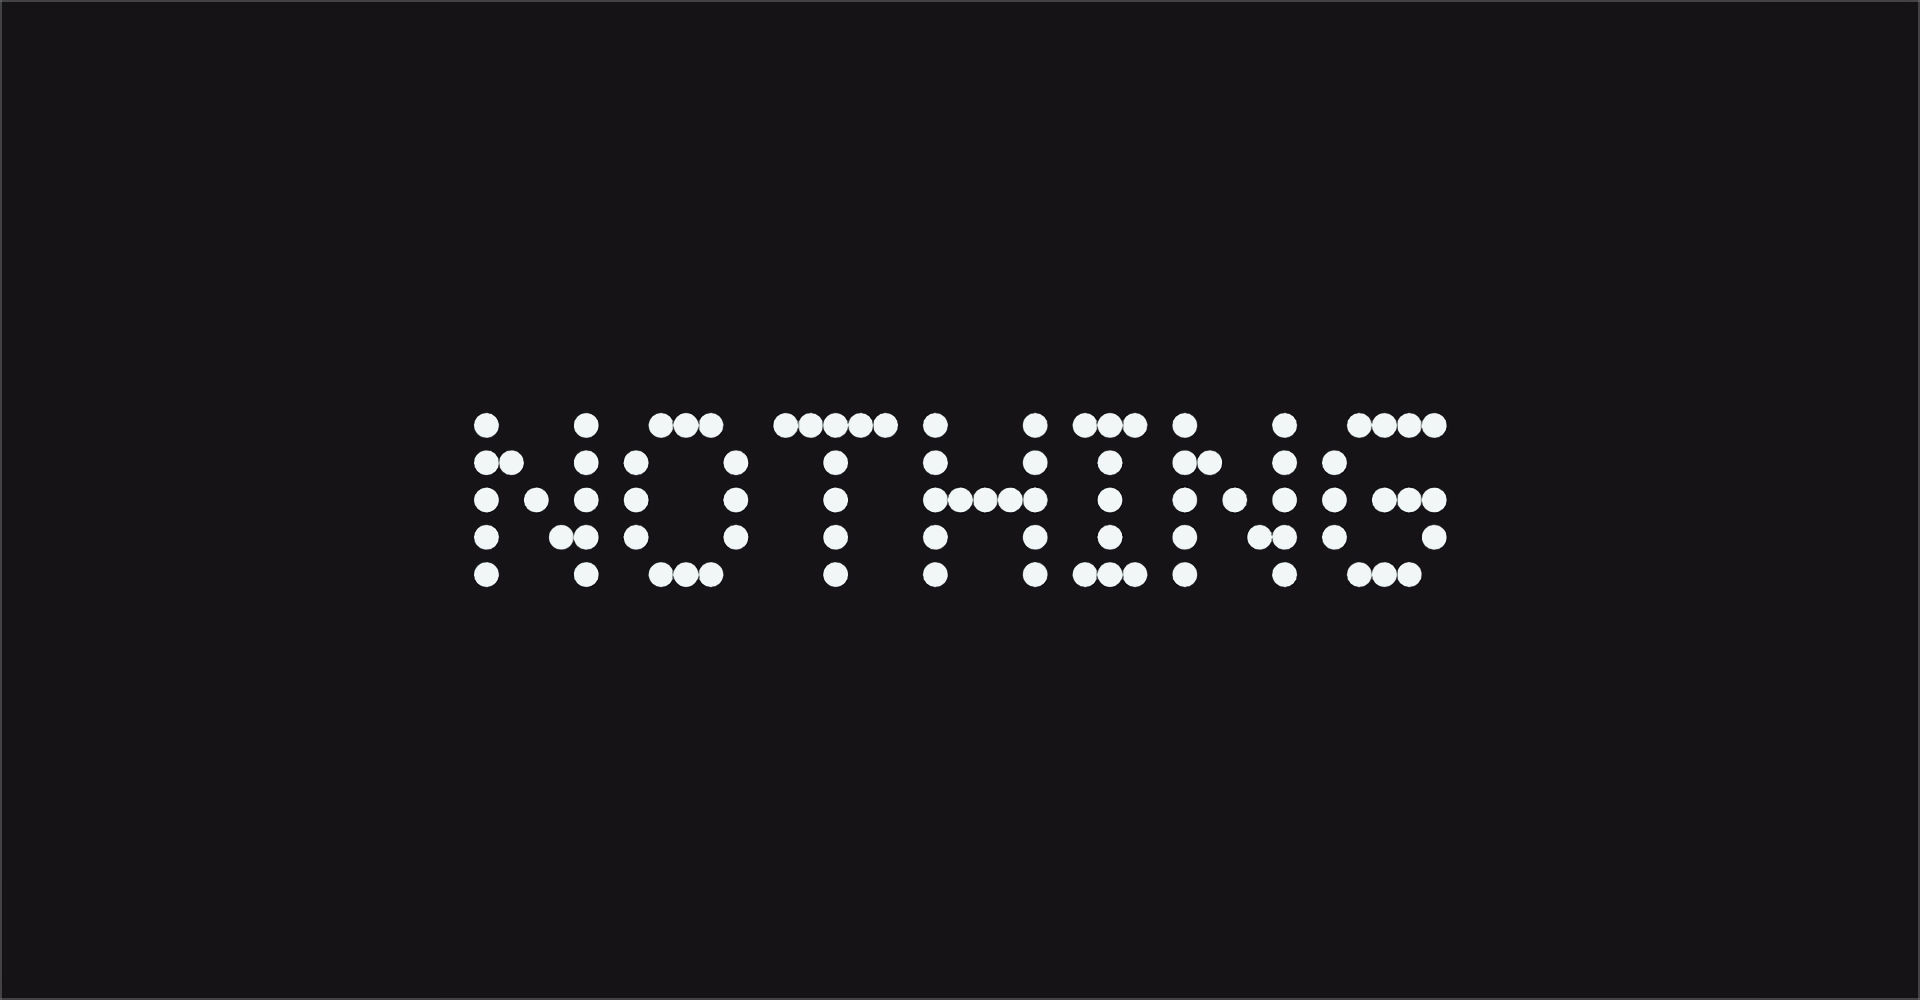 Why is every tech tycoon joining this mystery brand 'Nothing tech'?